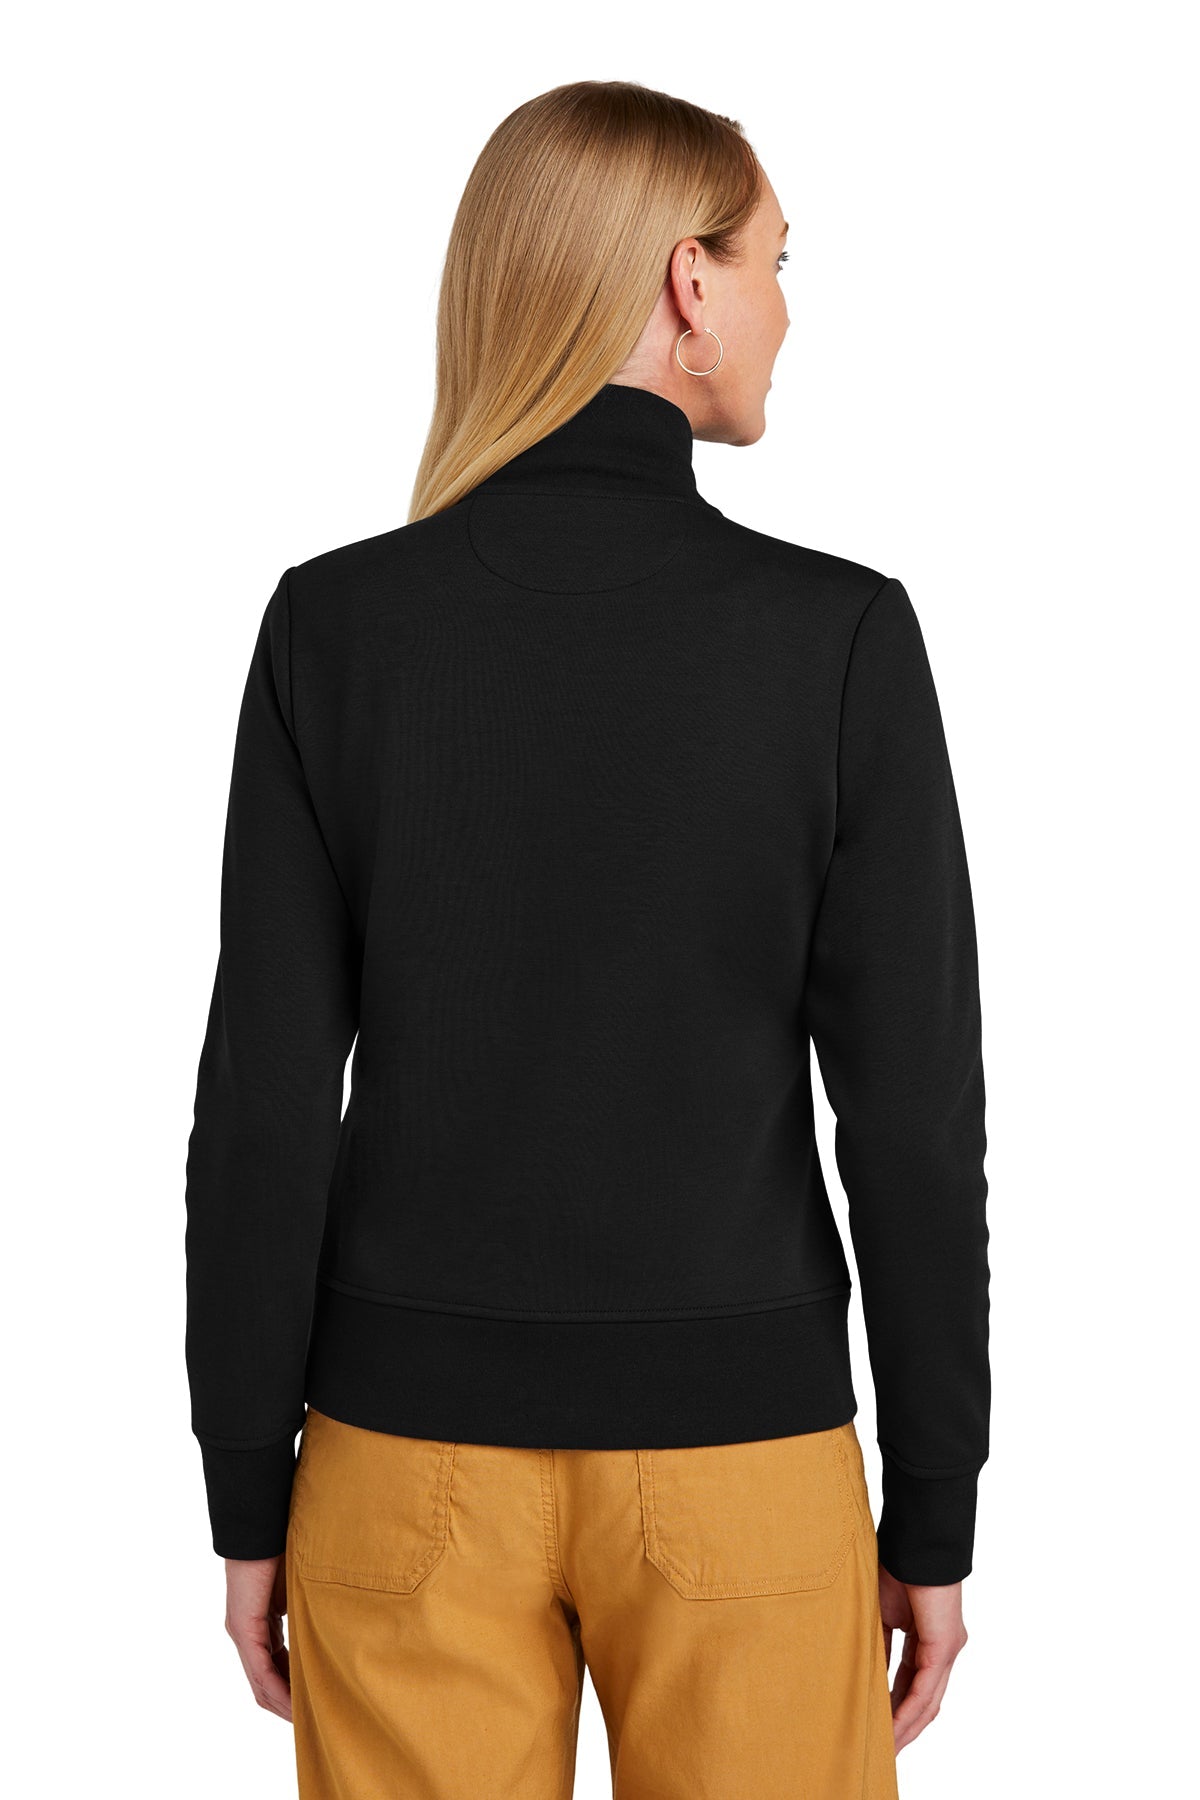 Brooks Brothers Womens Double-Knit Full-Zip, Deep Black